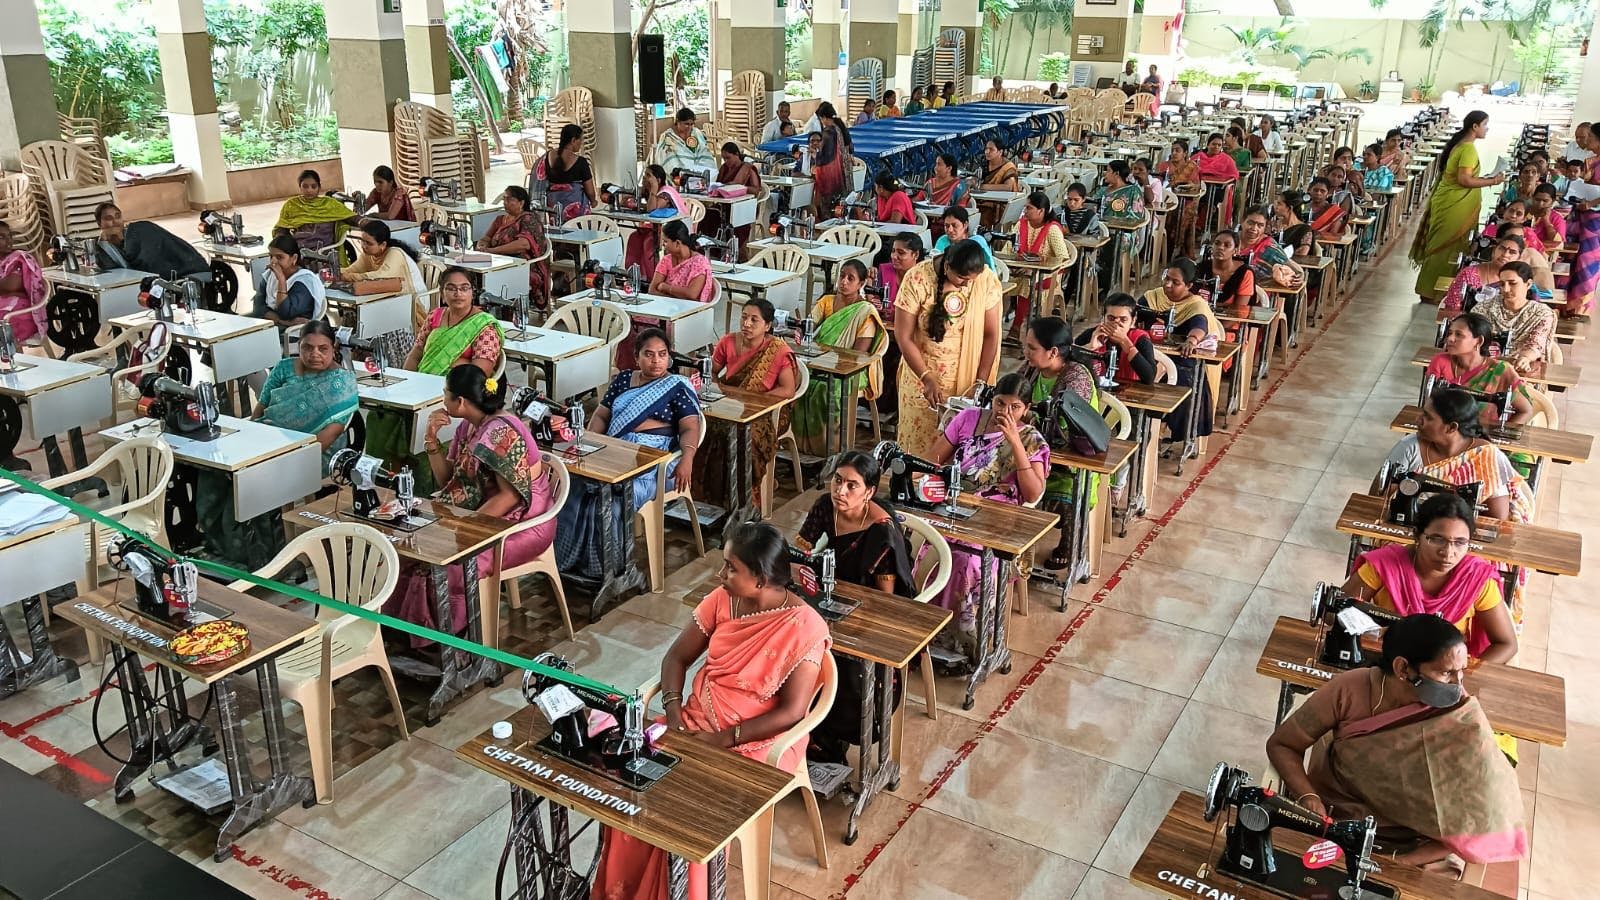 Barzilai Foundation provides 90-day vocational training program for 140 women in India